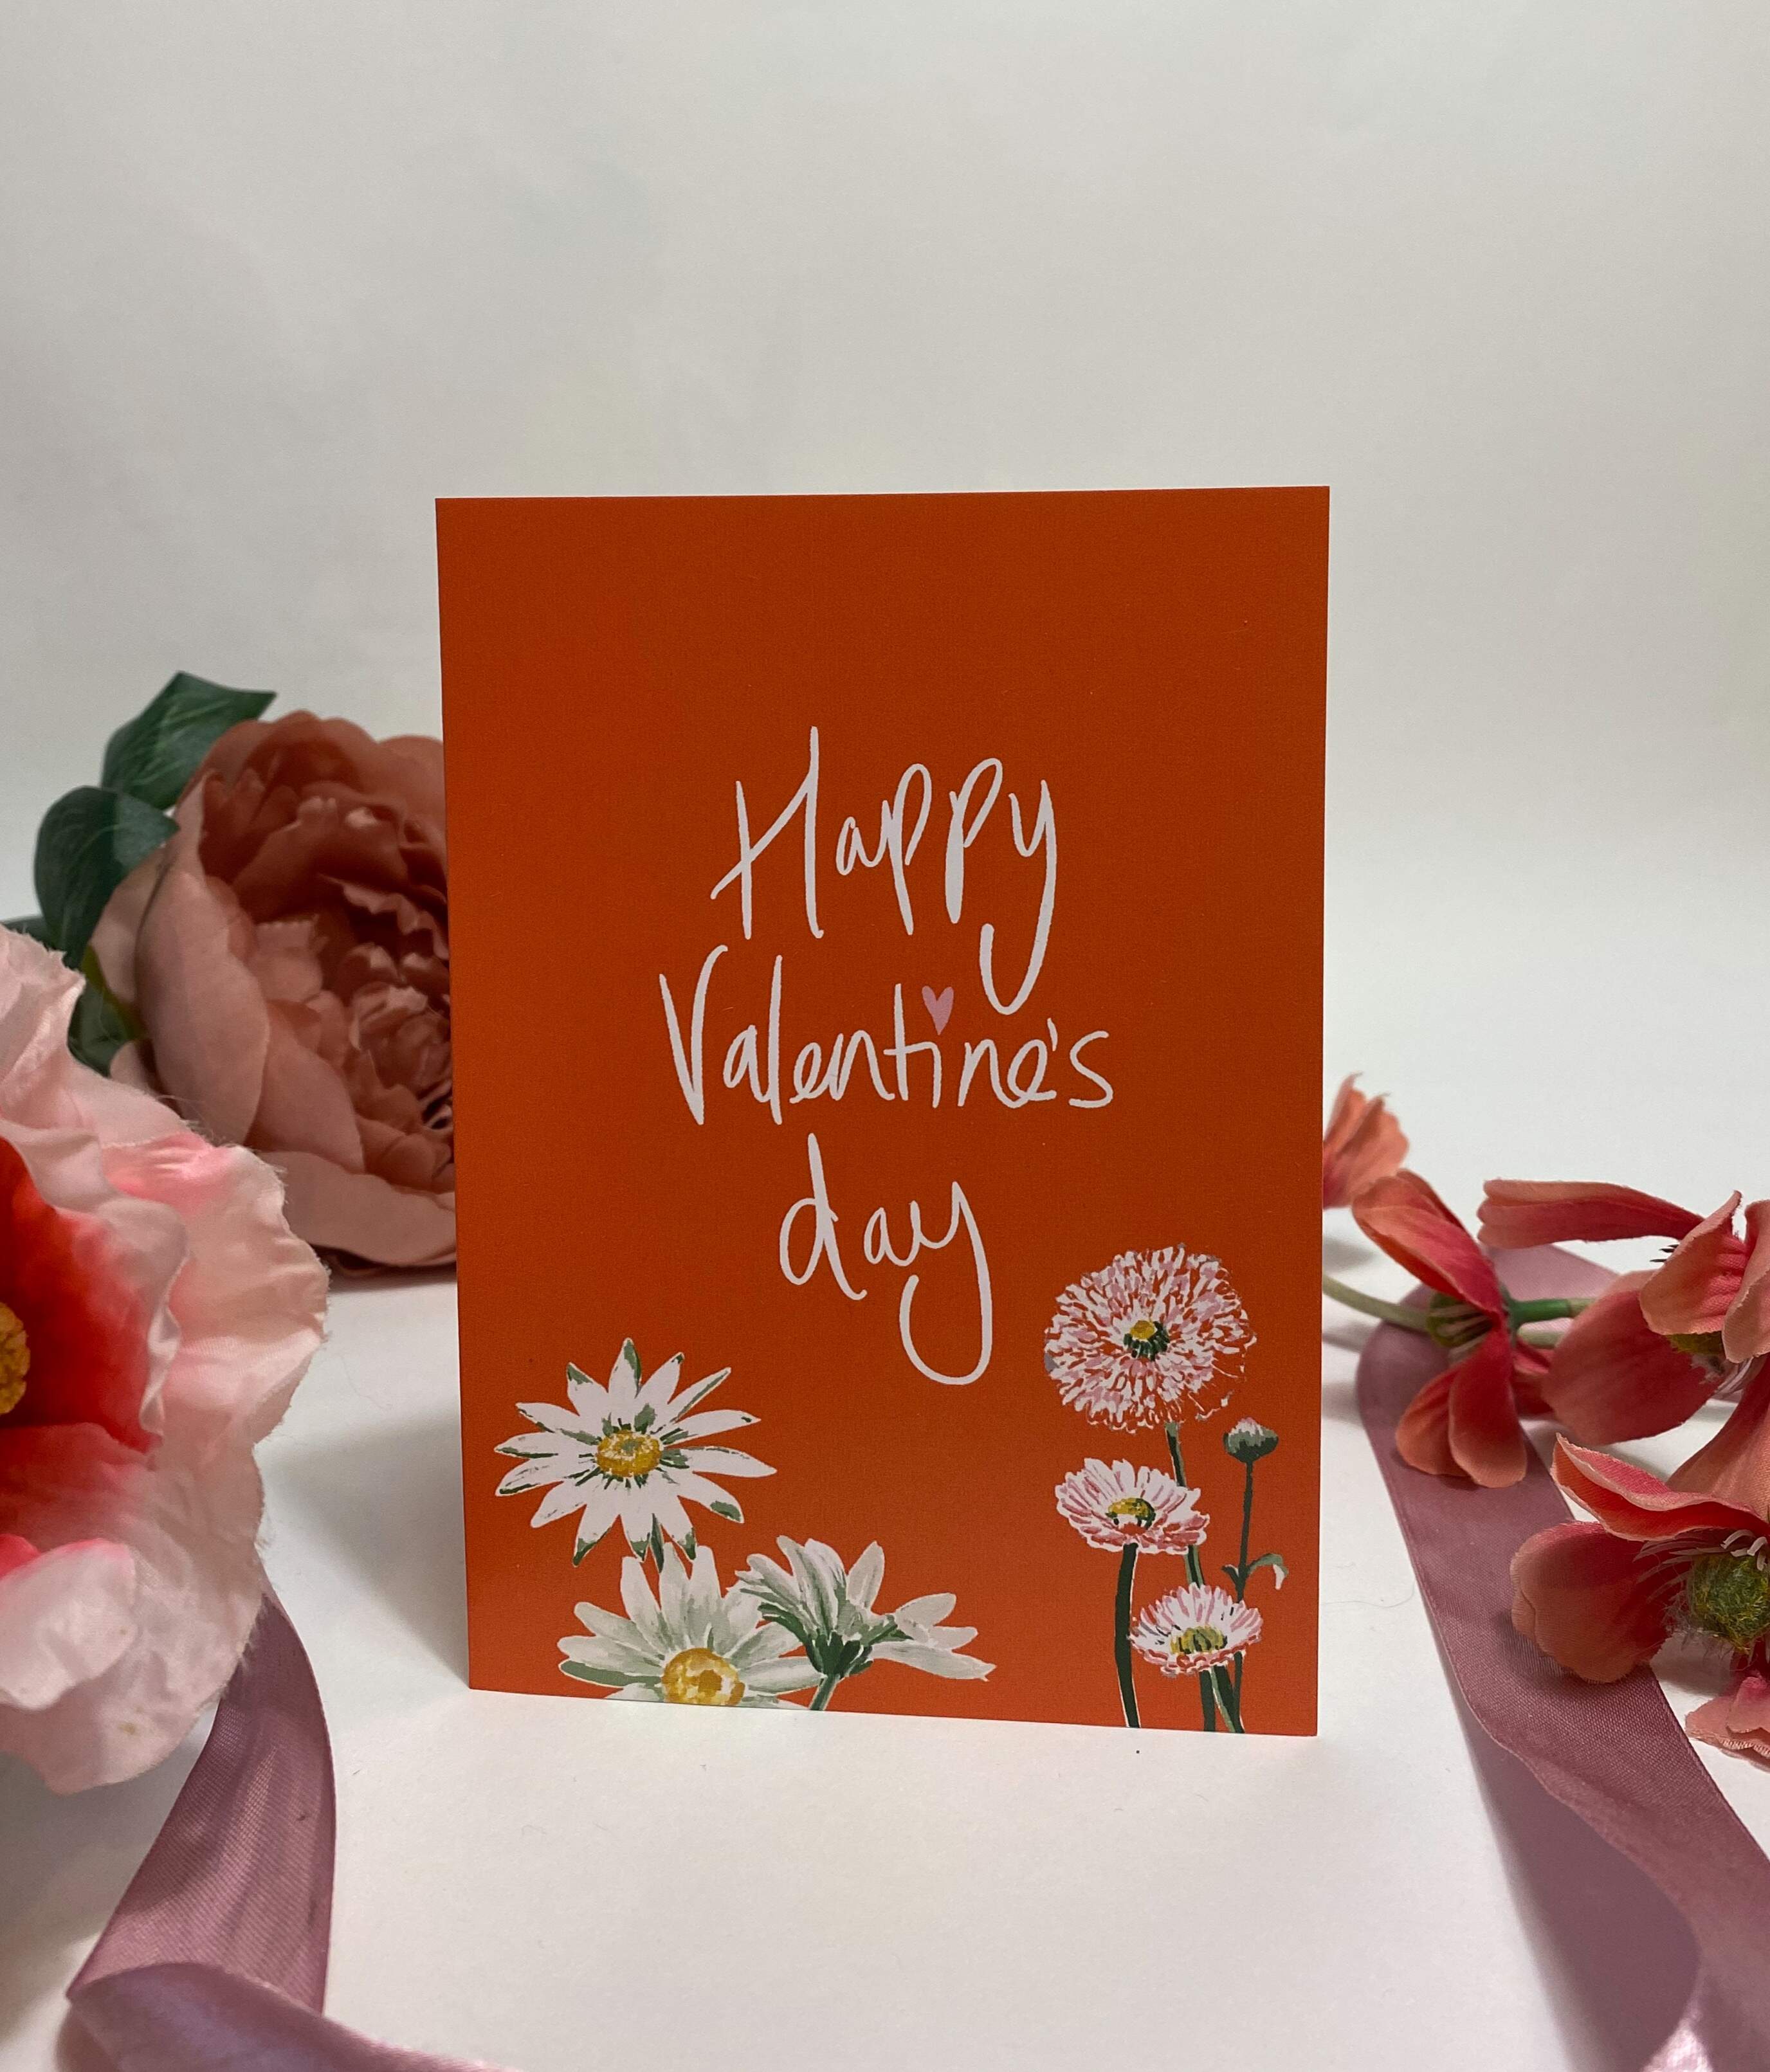 Happy Valentine’s Day greeting card with FREE biodegradable heart confetti inside LMV006